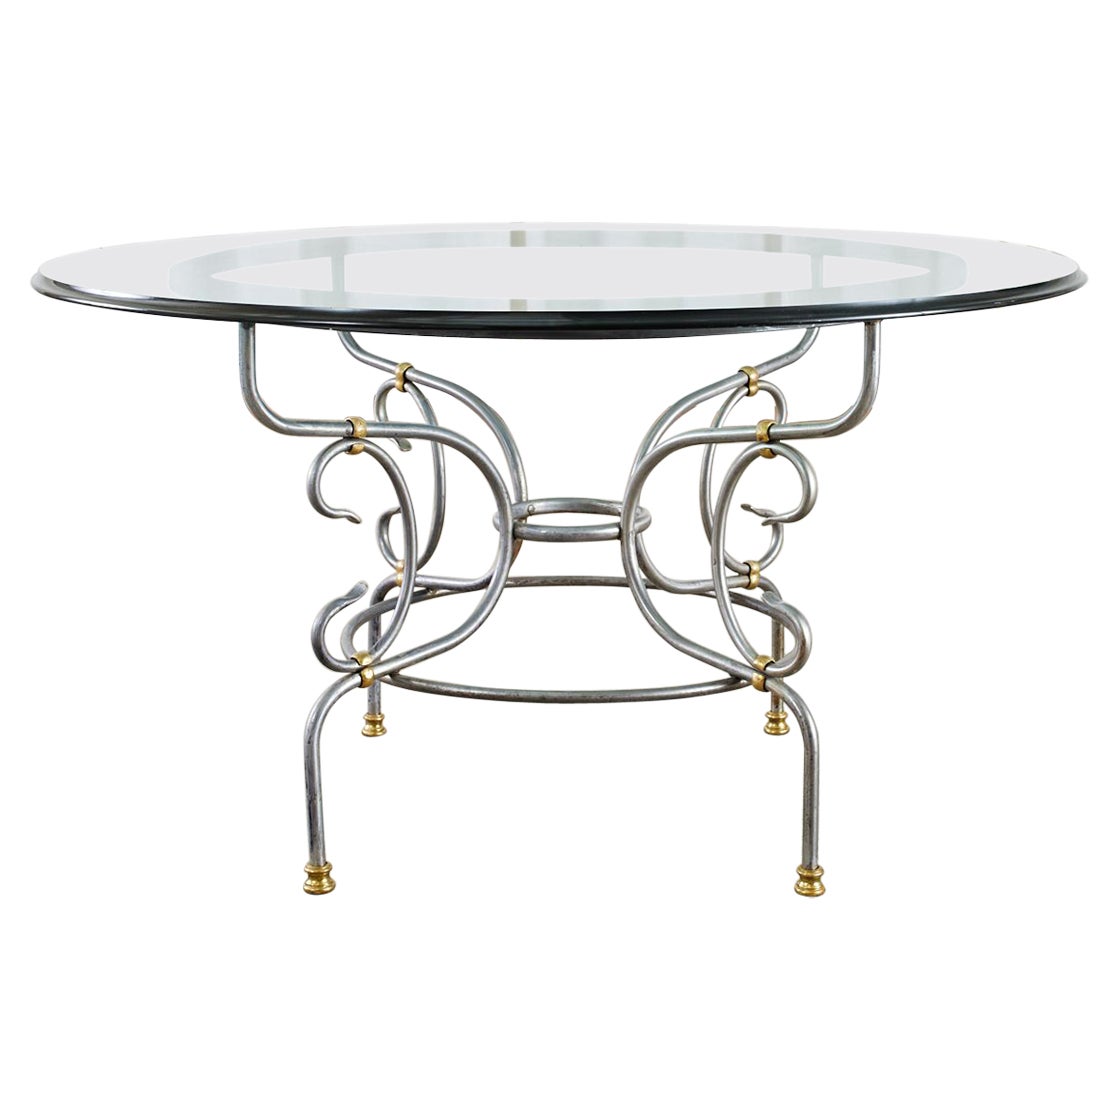 French Art Nouveau Style Steel Bronze Garden Dining Table